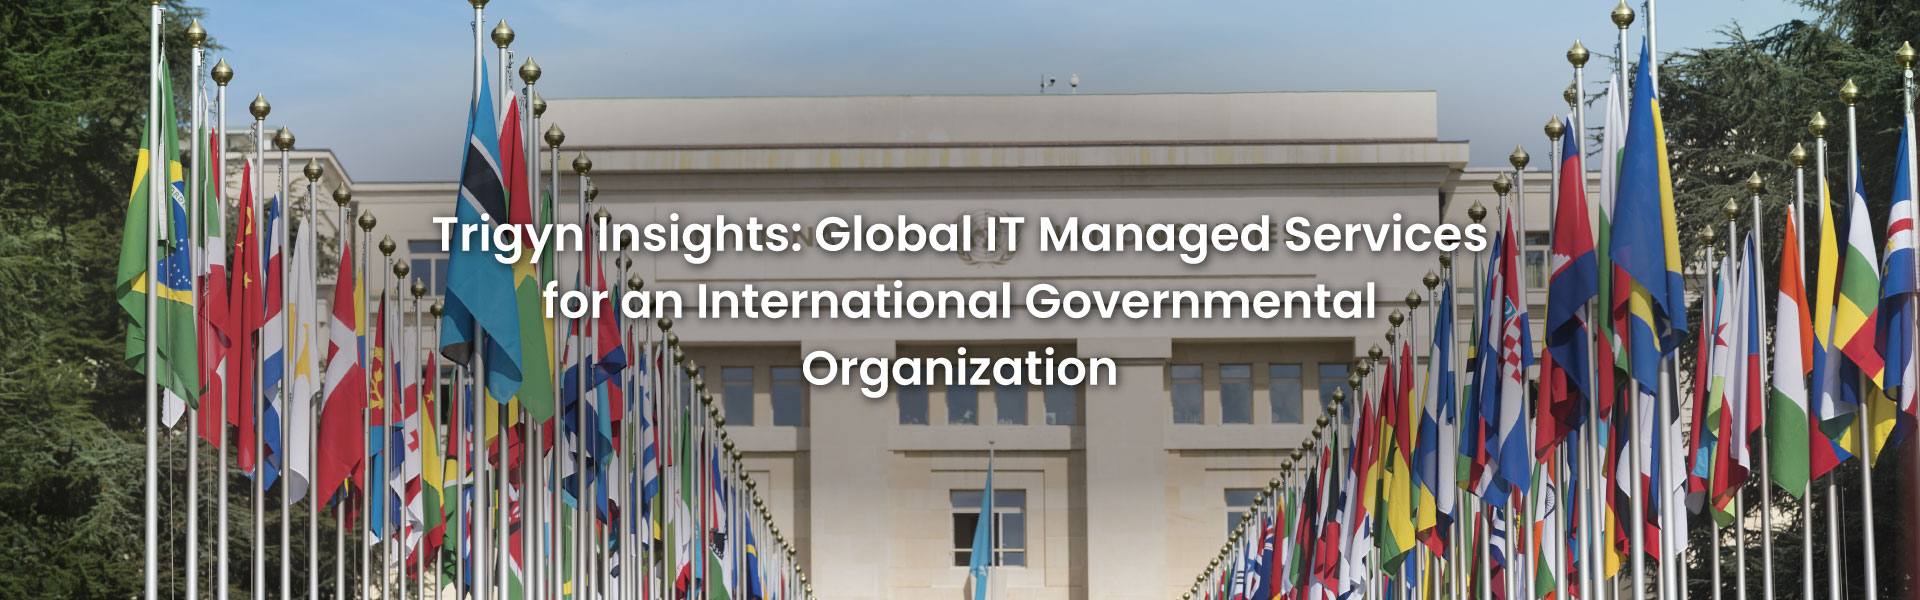 Global IT Managed Services for an International Governmental Organization